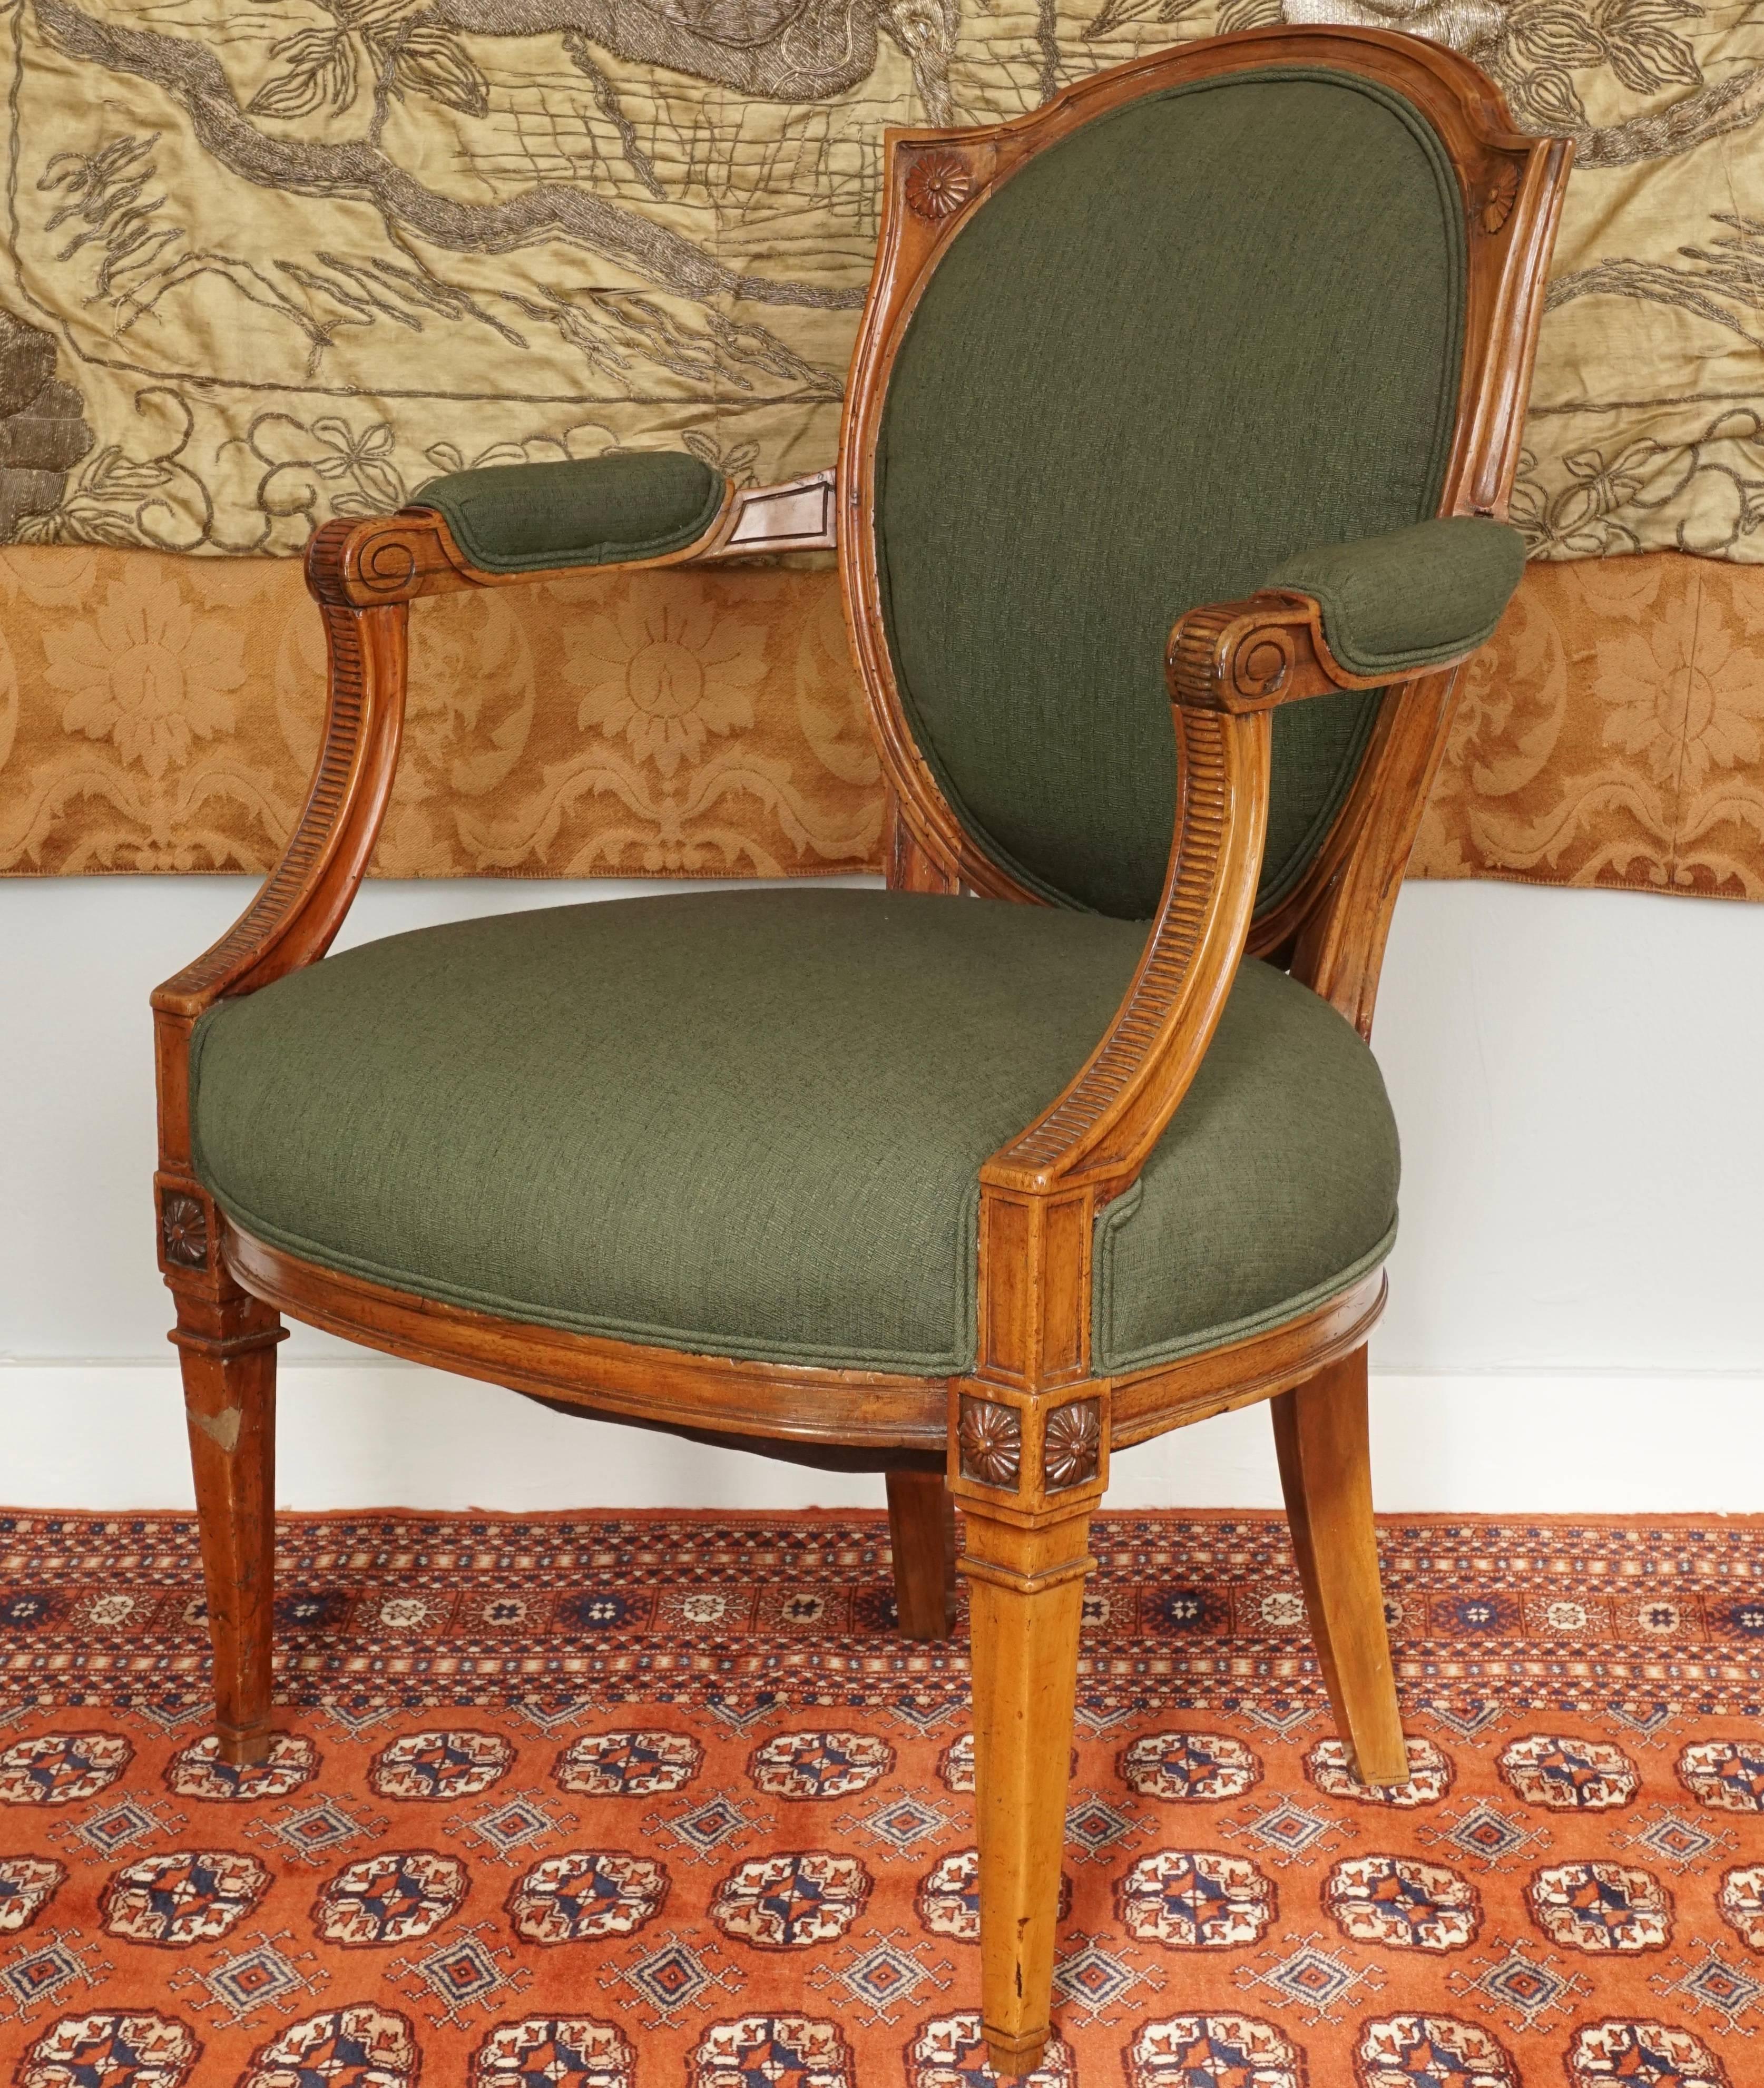 Hand-Carved French Louis XVI Walnut Upholstered Armchair Fauteuil, Late 18th Century